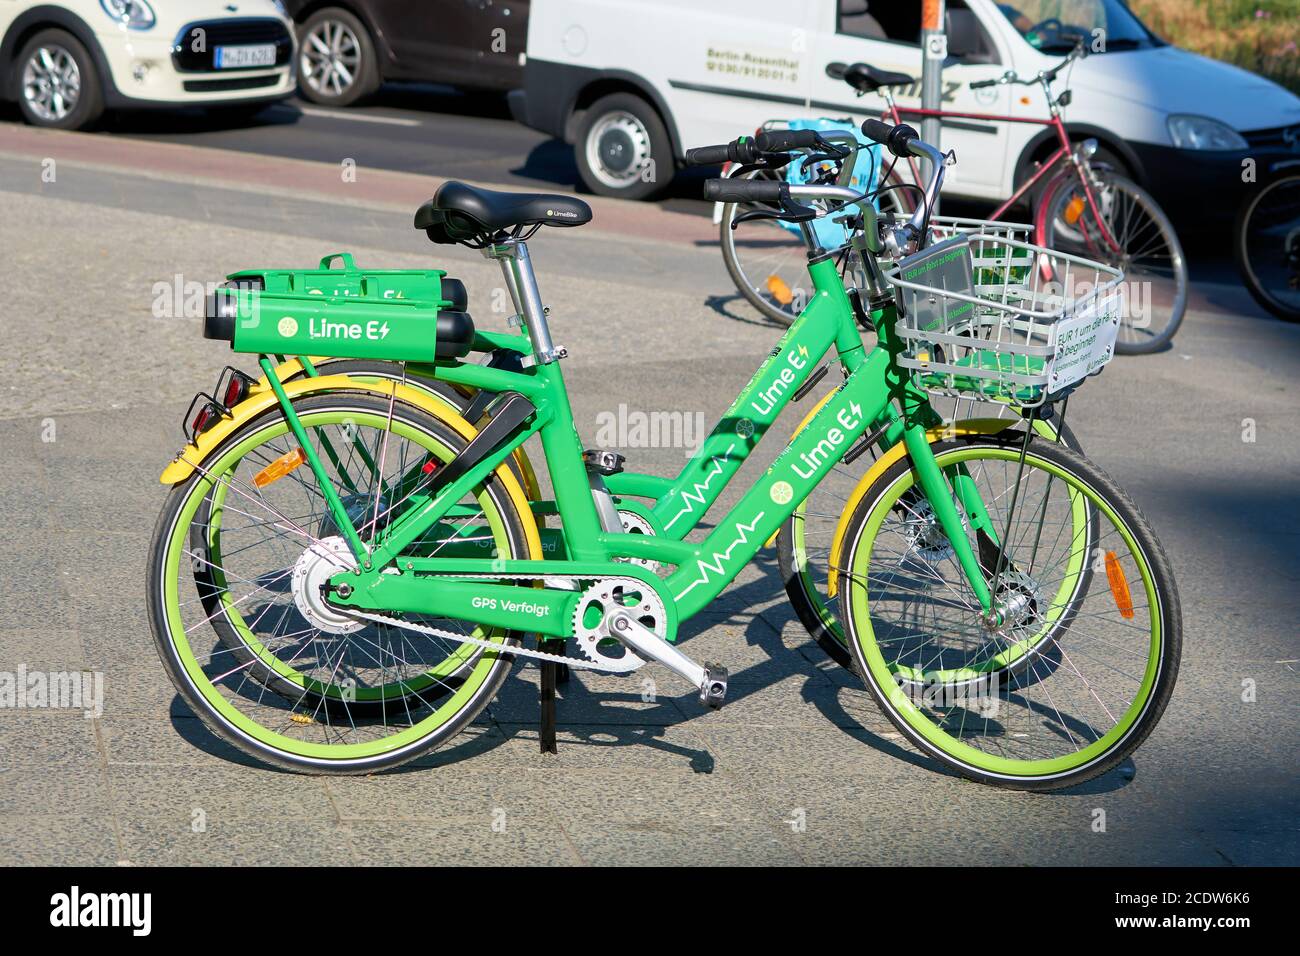 Rental bikes of the company LimeBike from California in the city center of Berlin Stock Photo